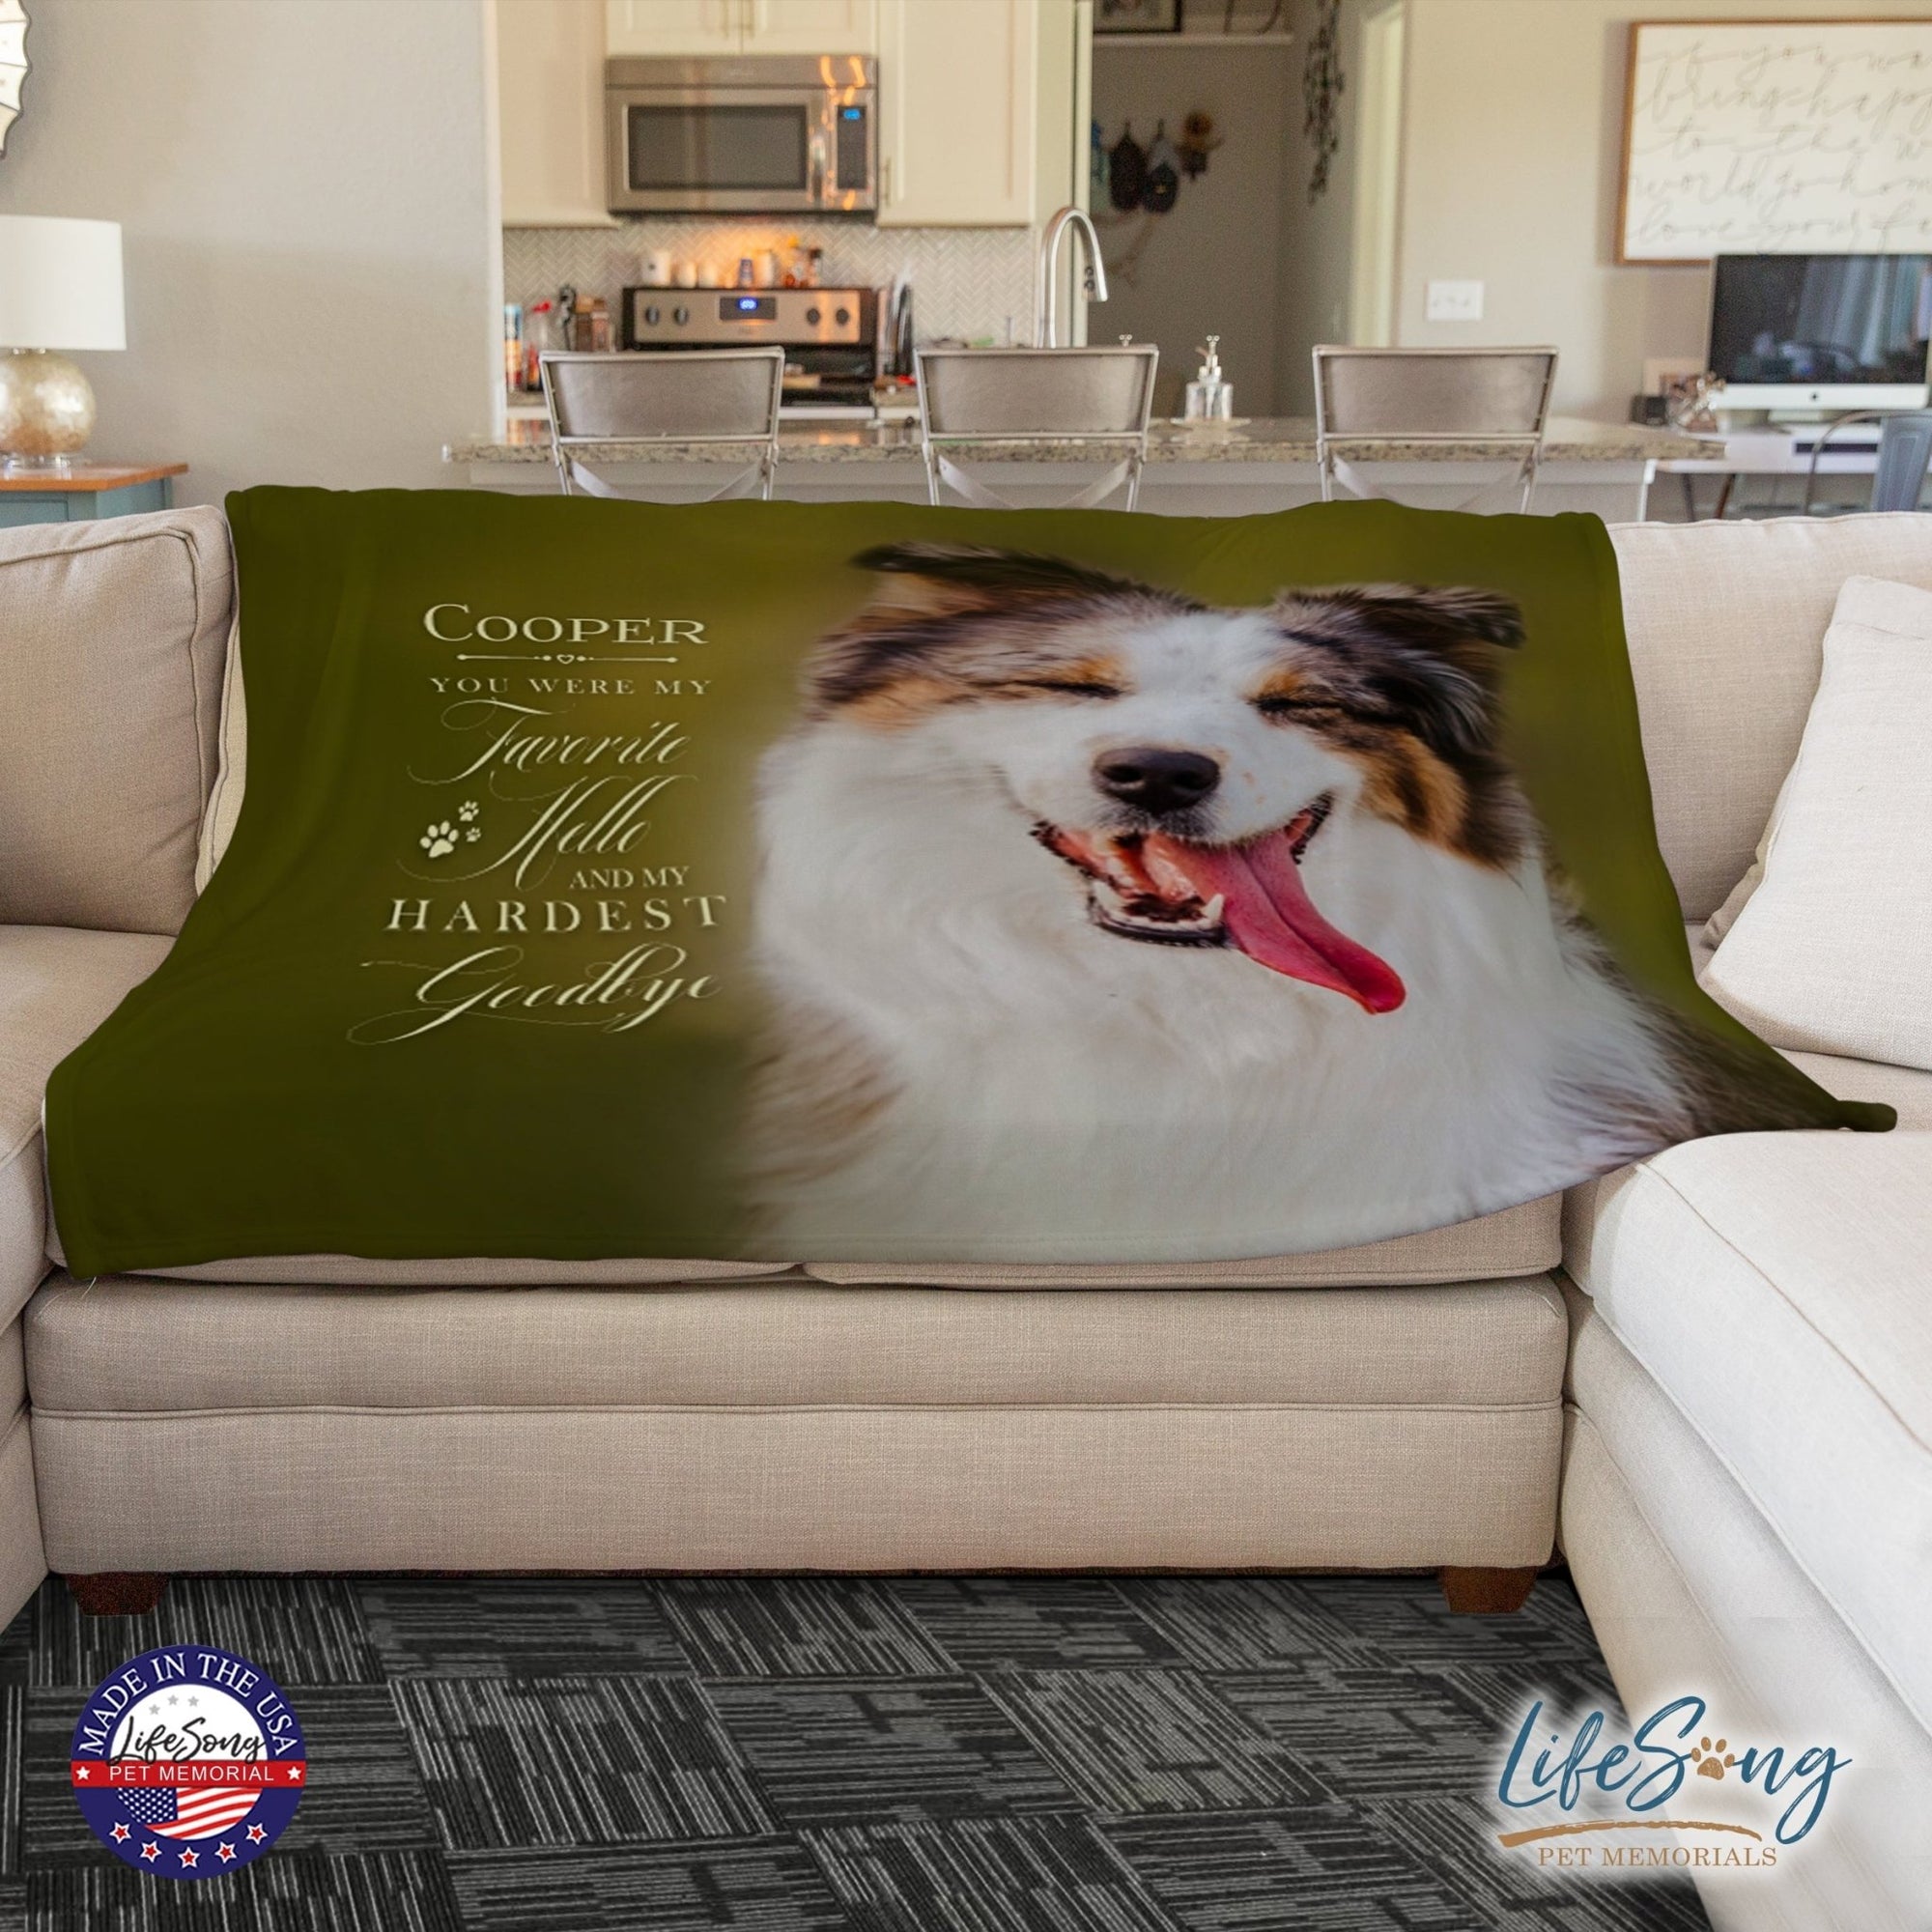 Personalized Pet Memorial Printed Throw Blanket - You Were My Favorite Hello - LifeSong Milestones